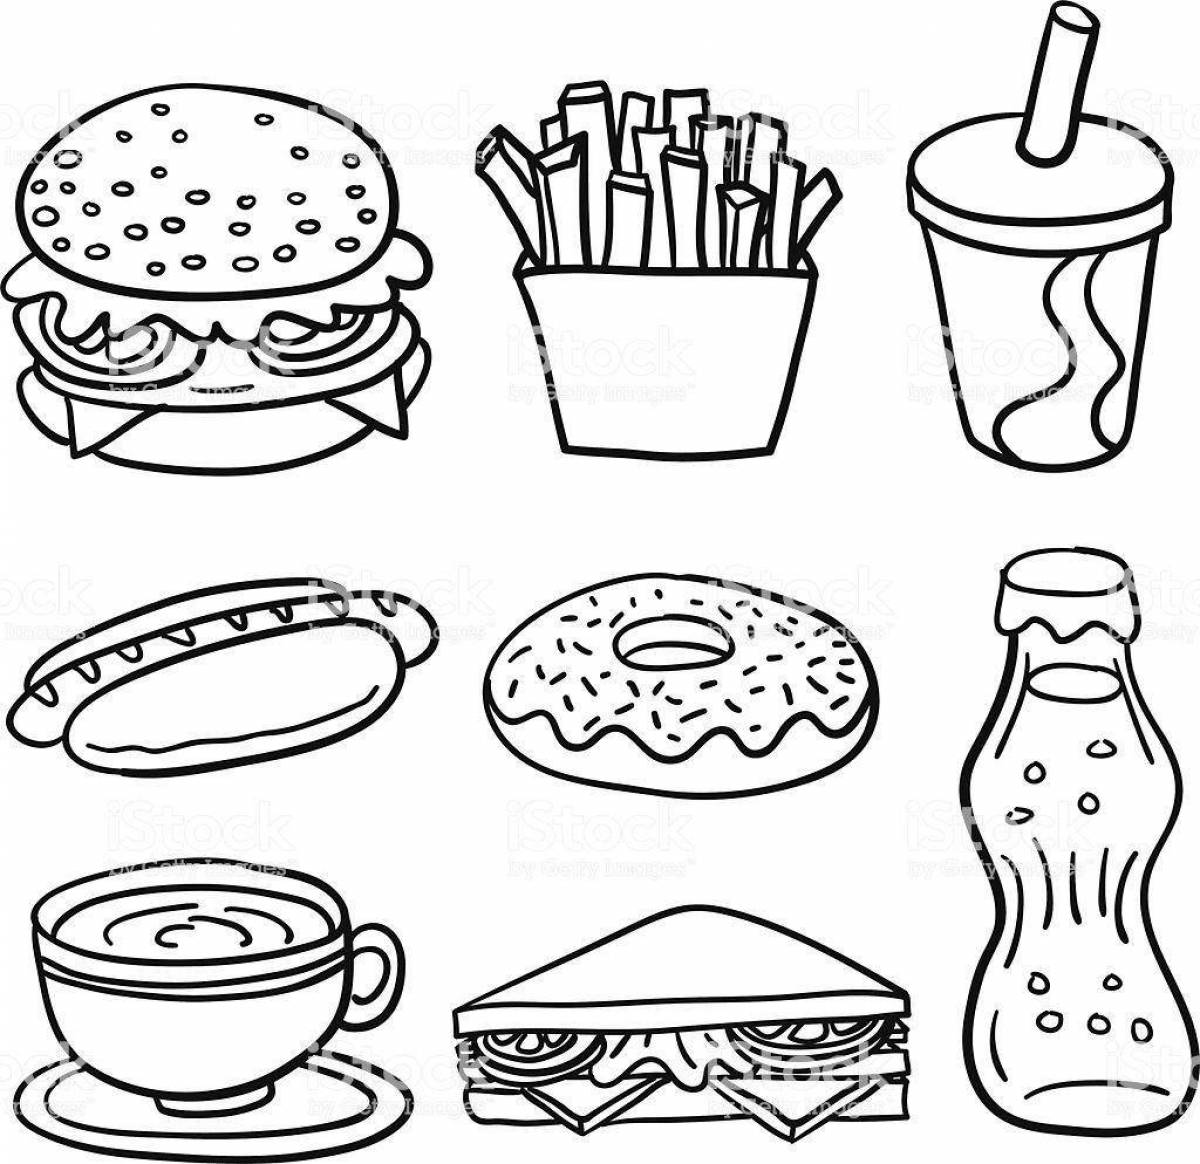 Bright food doll coloring page